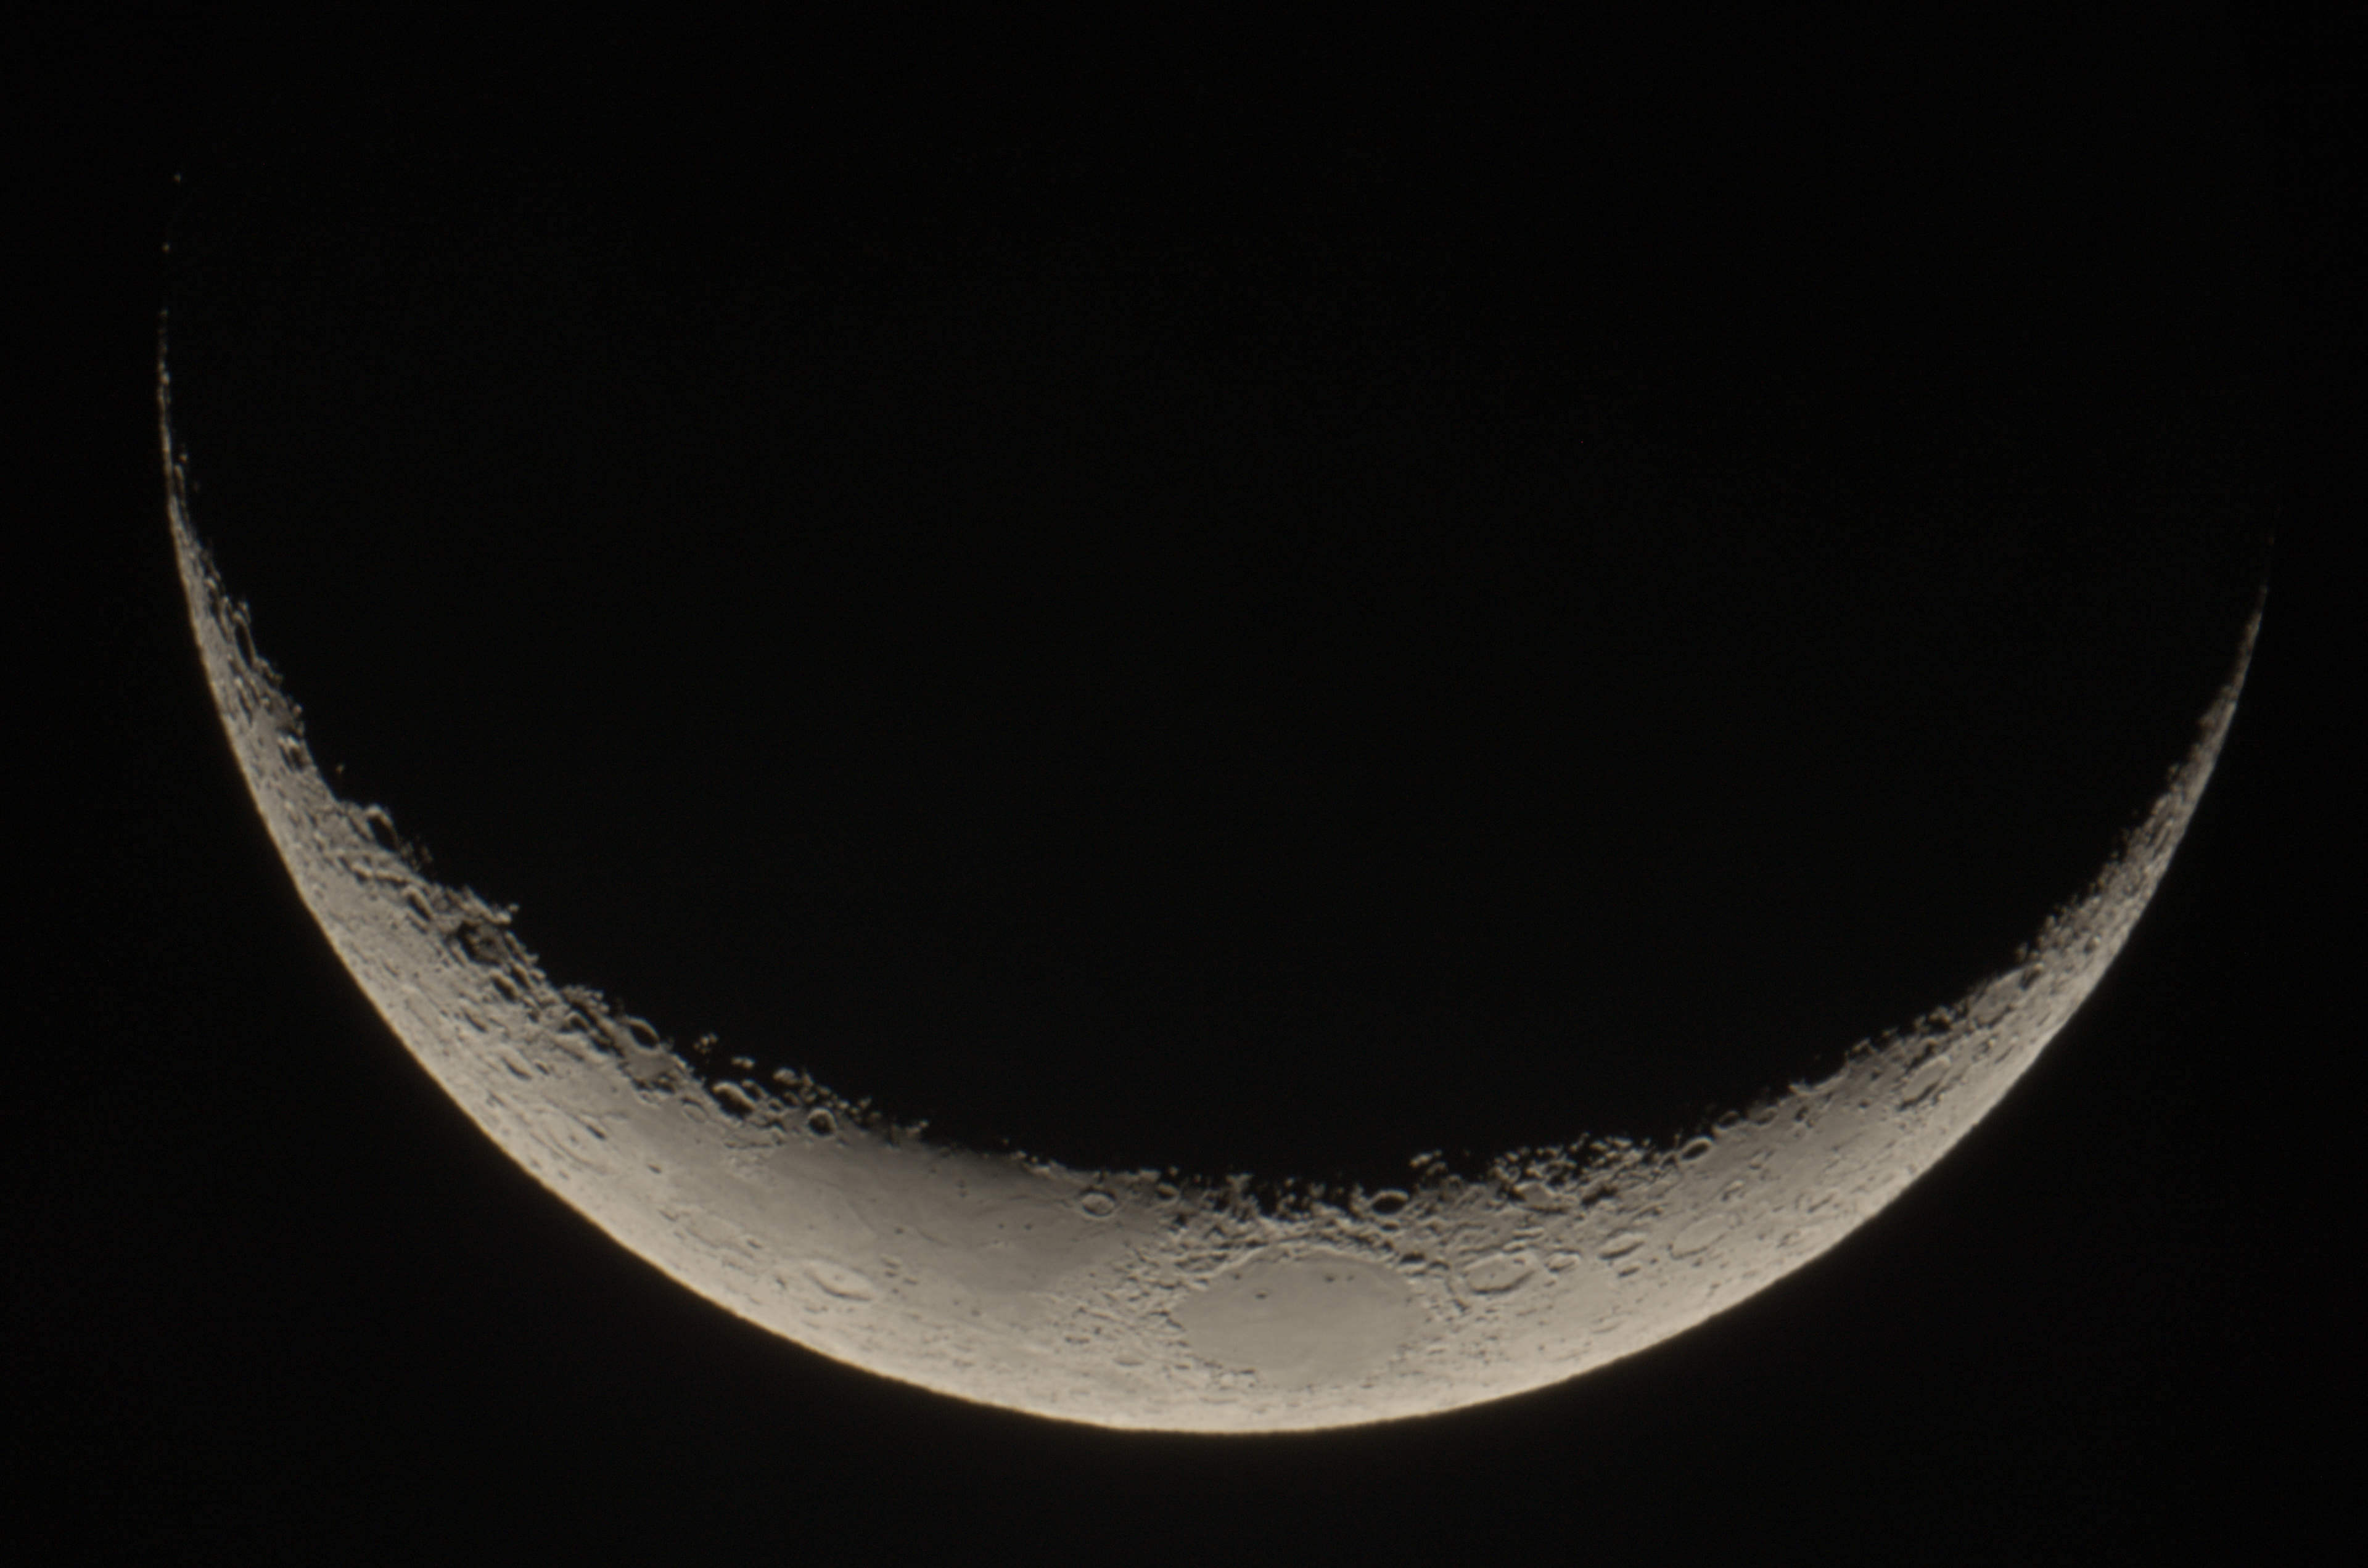 Waxing crescent, rotated 90° CW